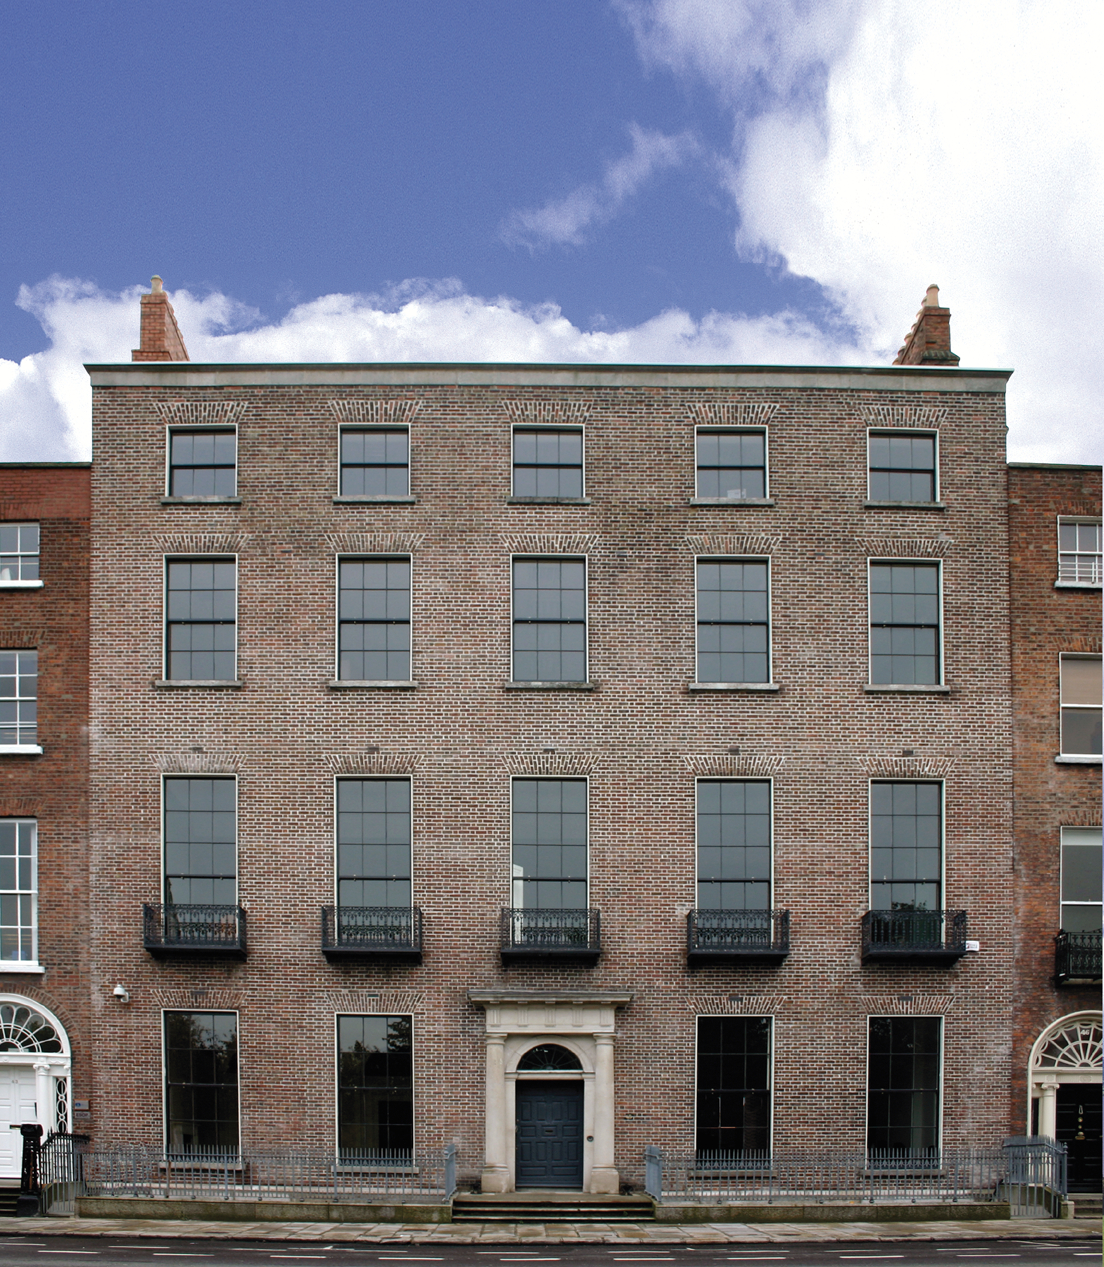 A large 4 storey red brick Georgian terraced house with blue sky and clouds